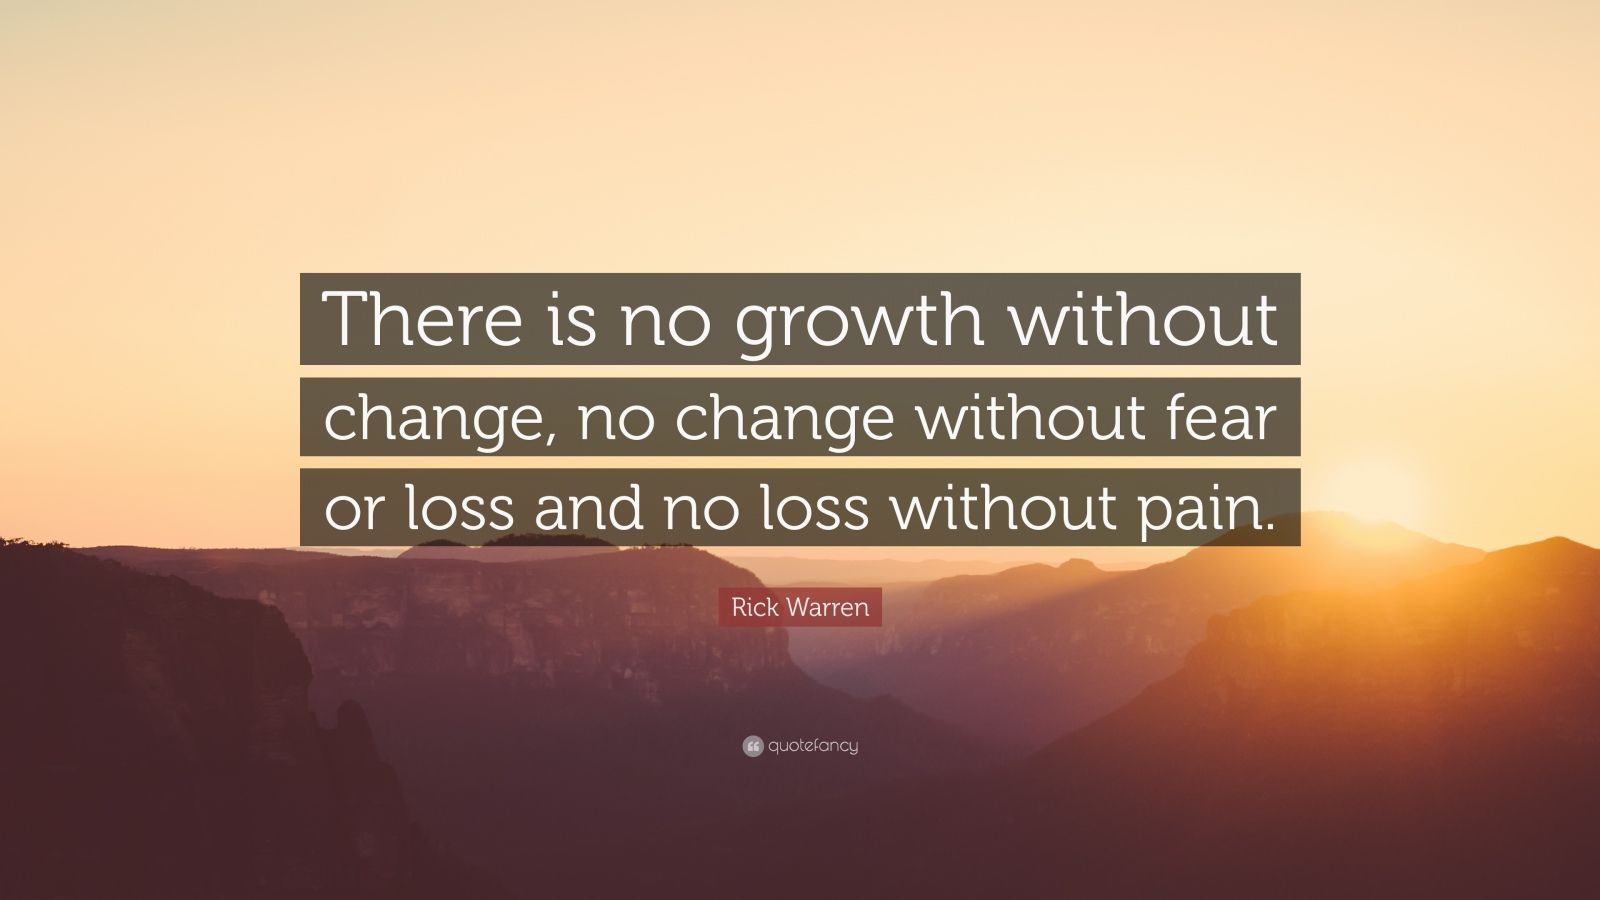 Rick Warren Quote: “There is no growth without change, no change ...